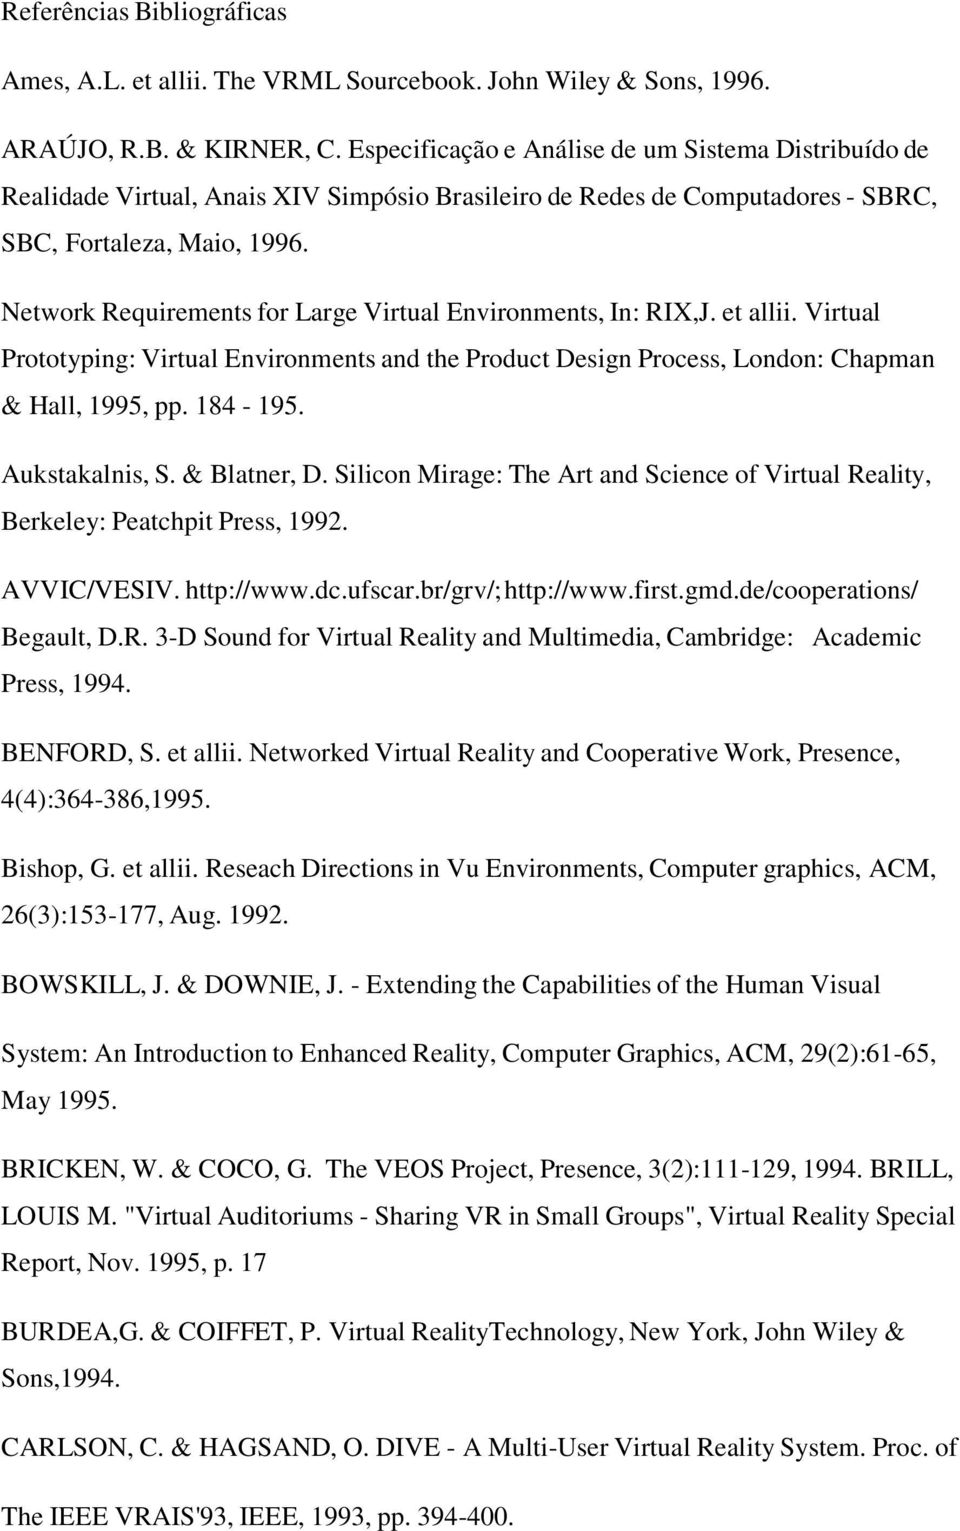 Network Requirements for Large Virtual Environments, In: RIX,J. et allii. Virtual Prototyping: Virtual Environments and the Product Design Process, London: Chapman & Hall, 1995, pp. 184-195.